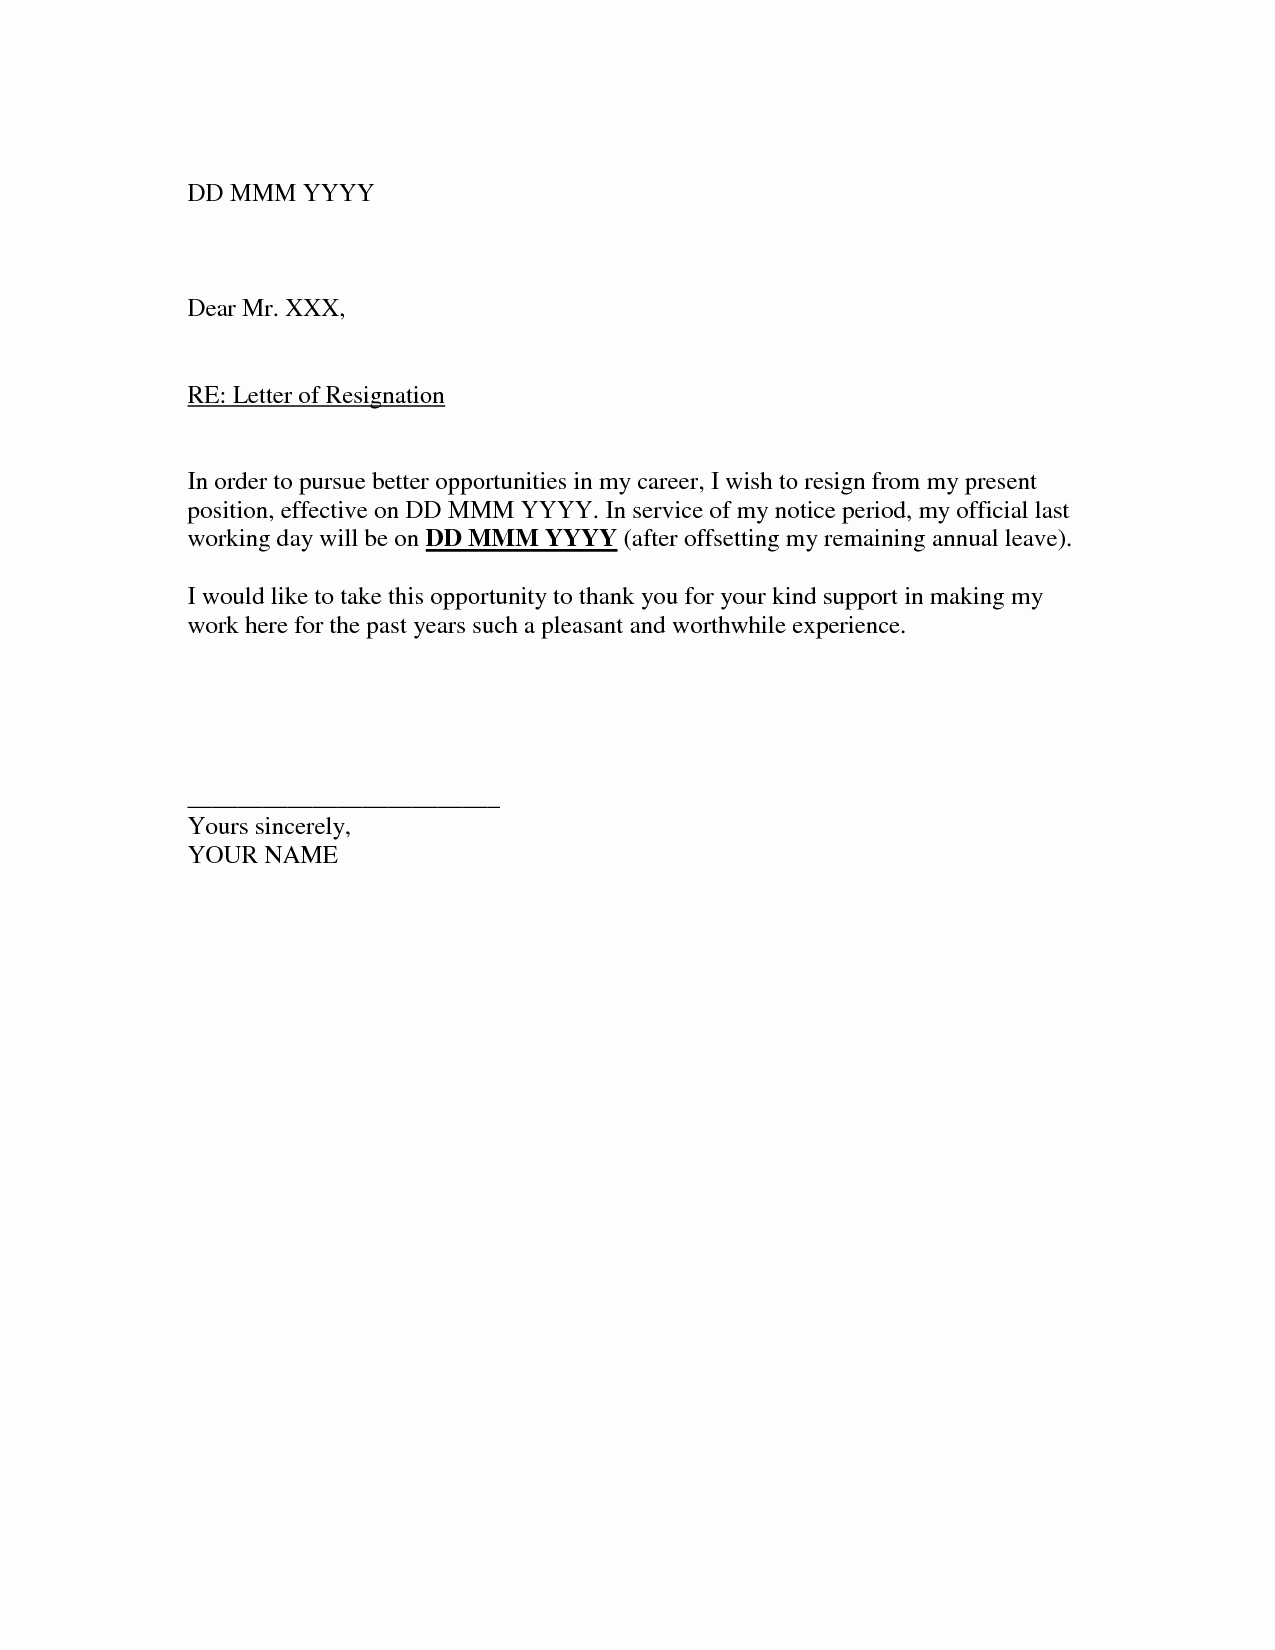 How to Write Easy Simple Resignation Letter Sample